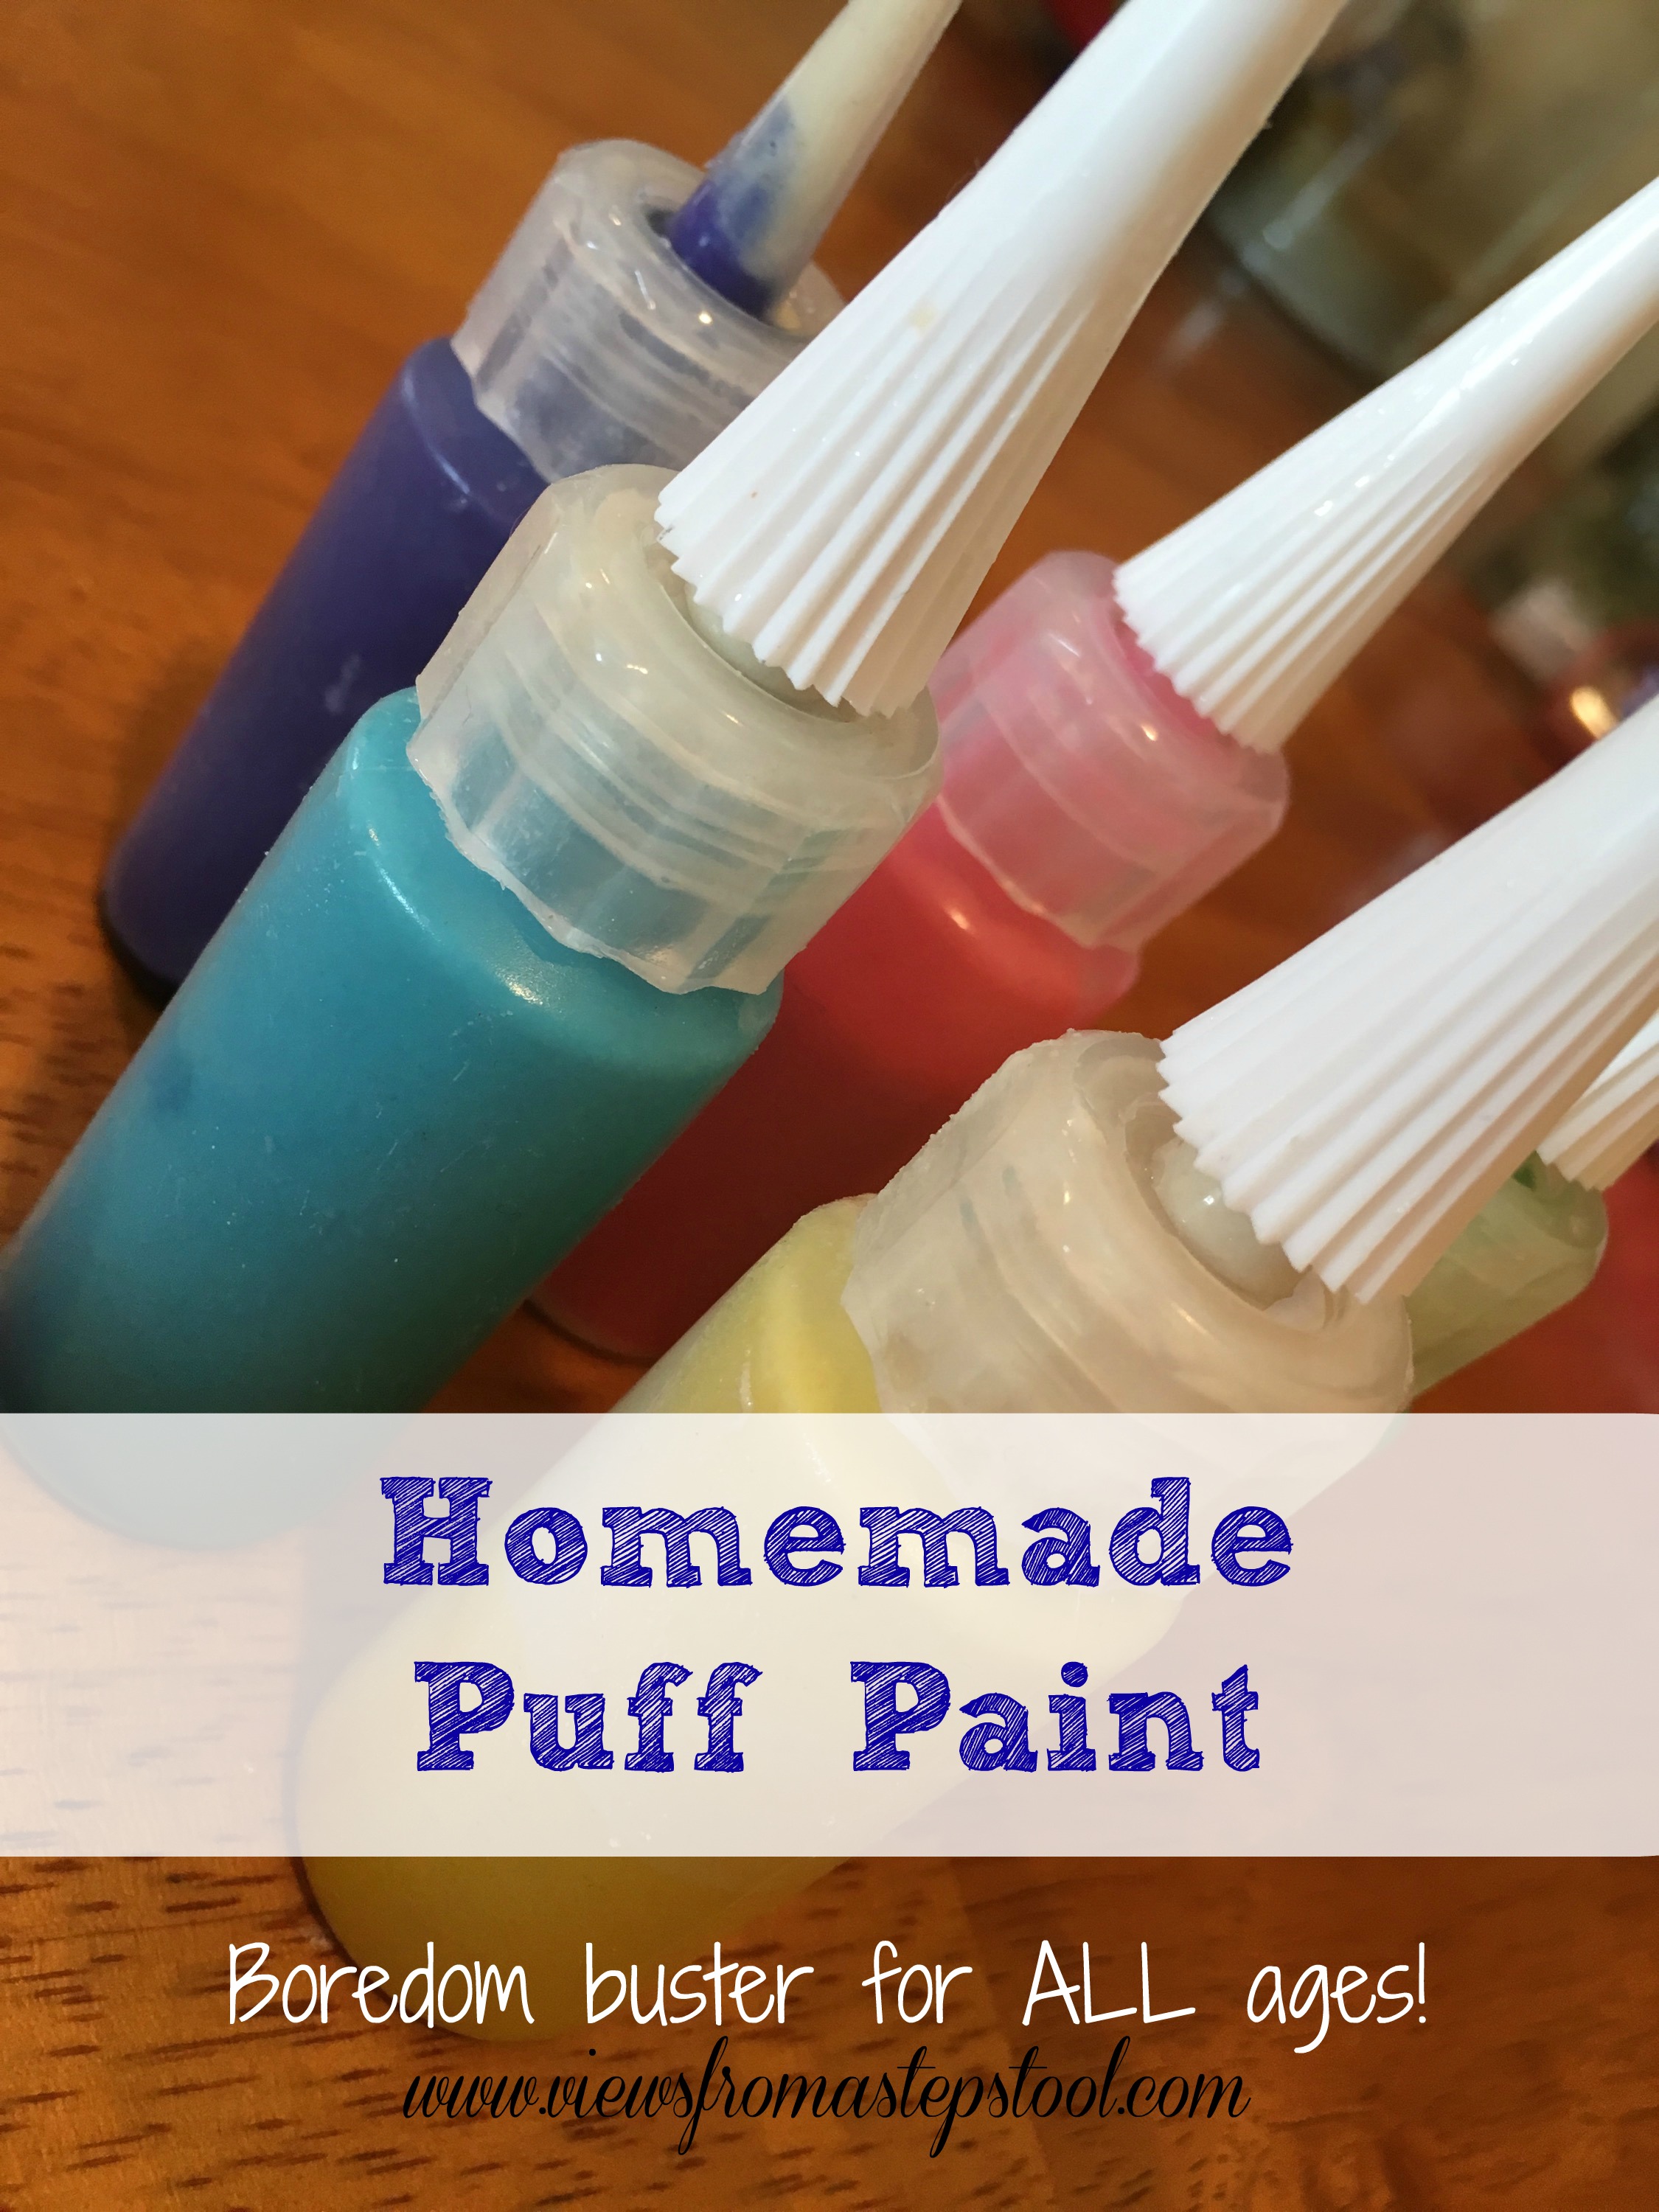 Homemade Puff Paint from Pantry Items - Views From a Step Stool